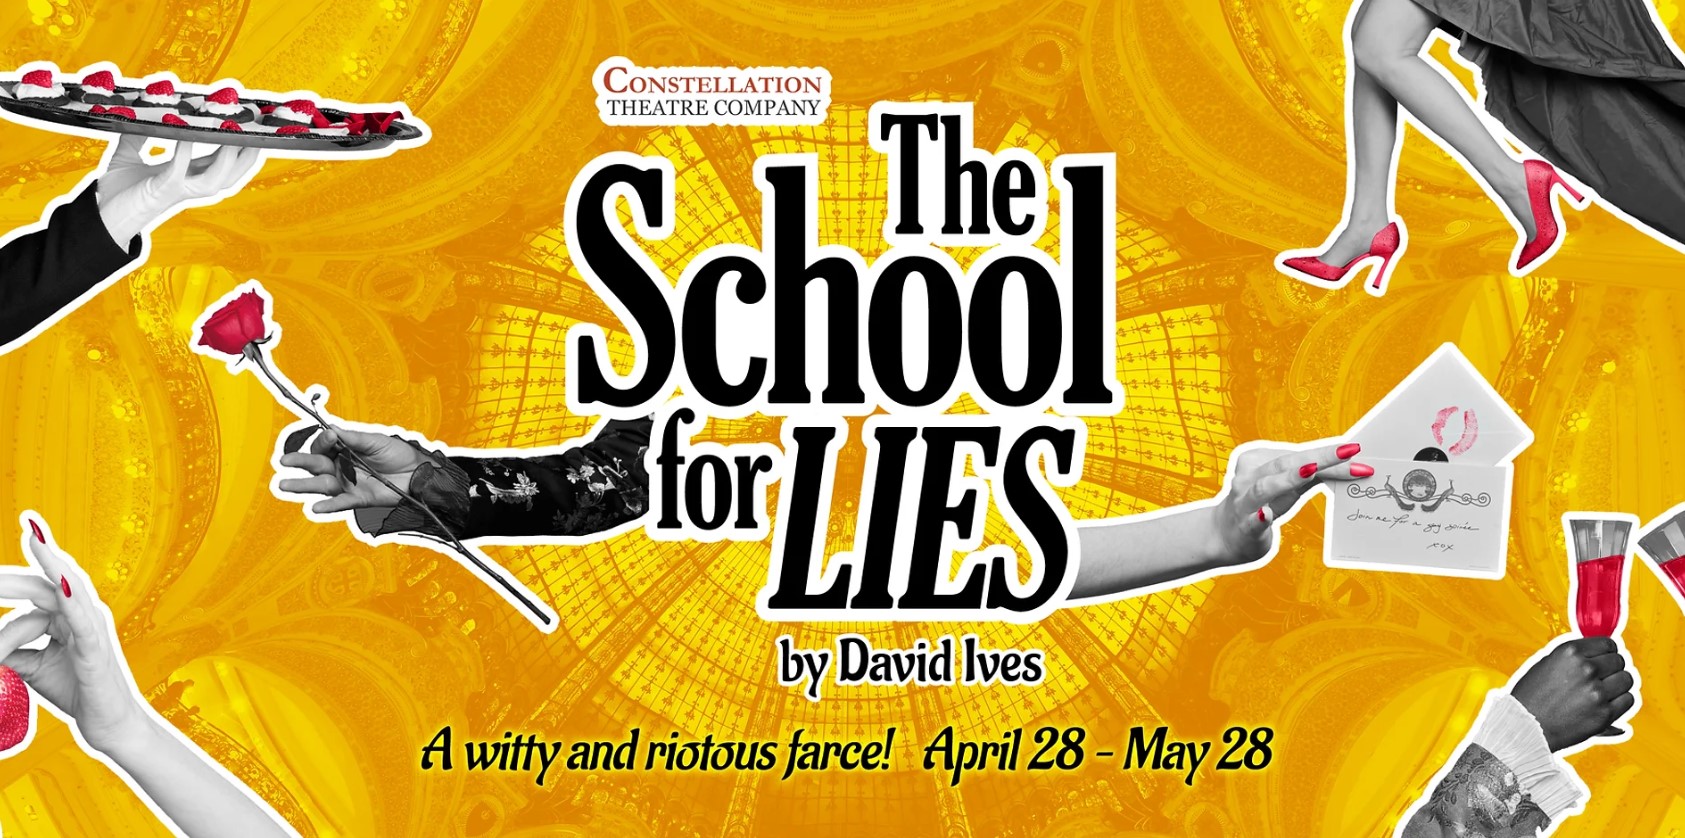 THE SCHOOL FOR LIES at Constellation Theatre